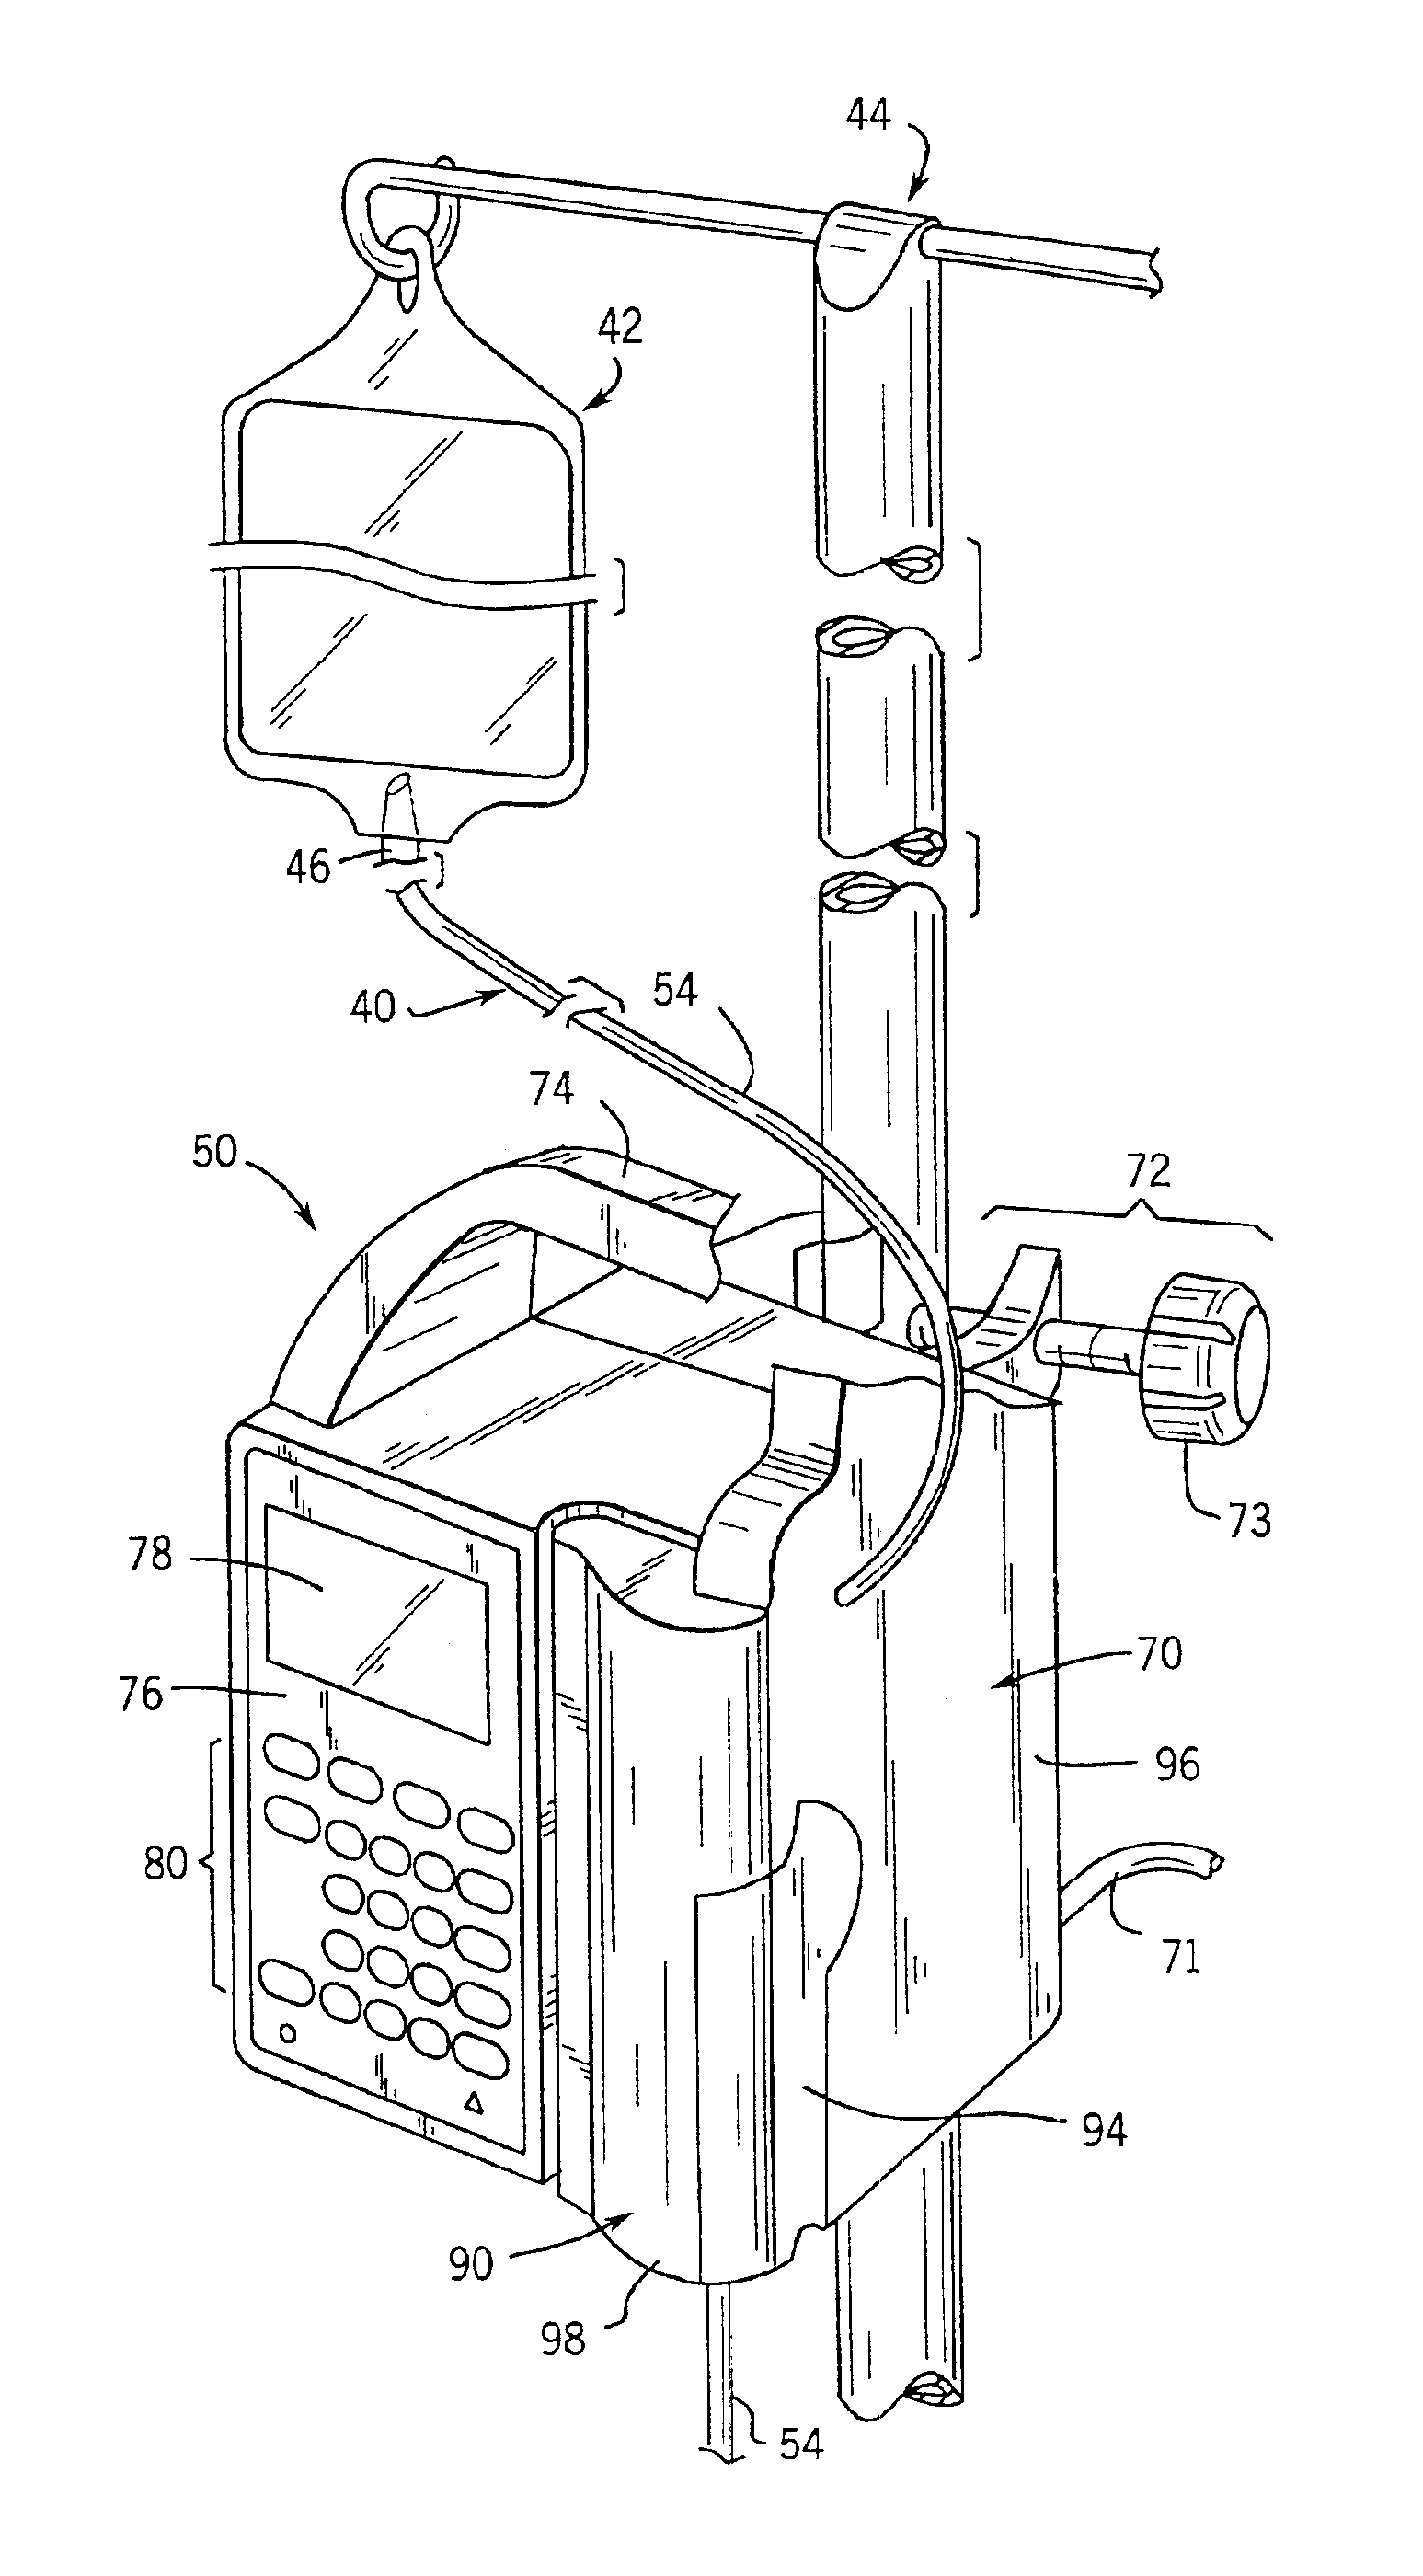 Temperature compensation system for regulating flow through tubing in a pump